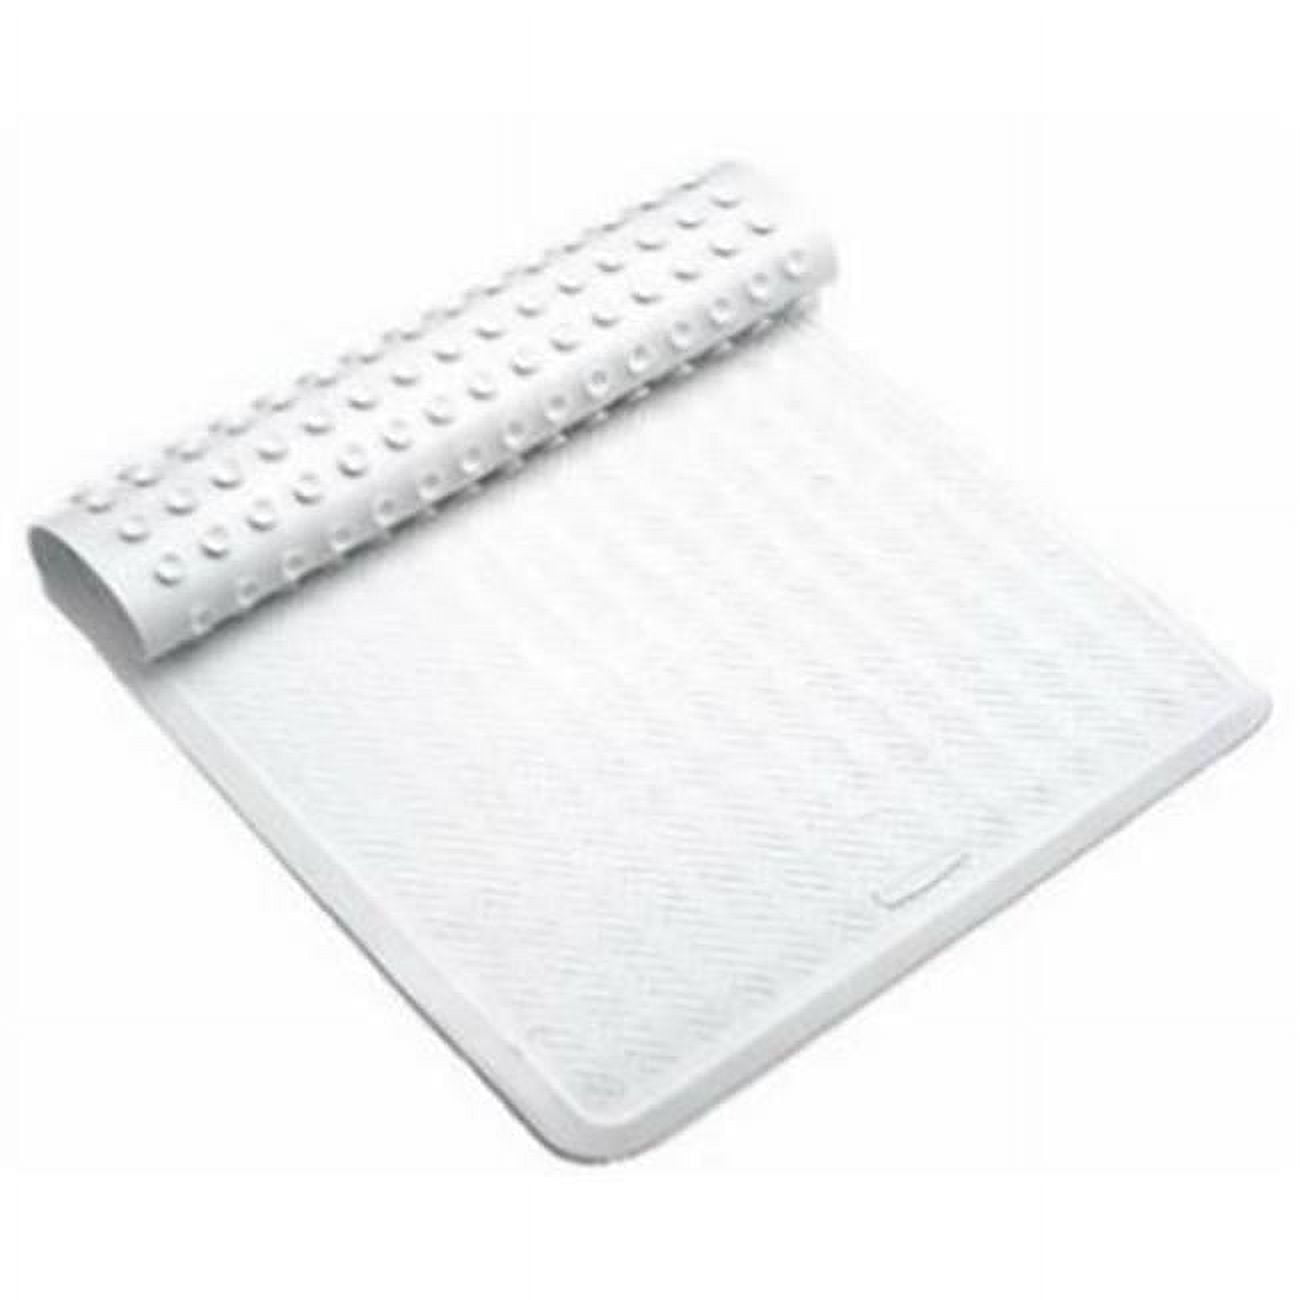 Rubbermaid Commercial Products Softi-Grip Bath Mat, Rubber, Off-White,  22.5 L X 14 W, Rubber Bath Mats, Bath Mats, Bathroom Fixtures, Maintenance and Engineering, Open Catalog